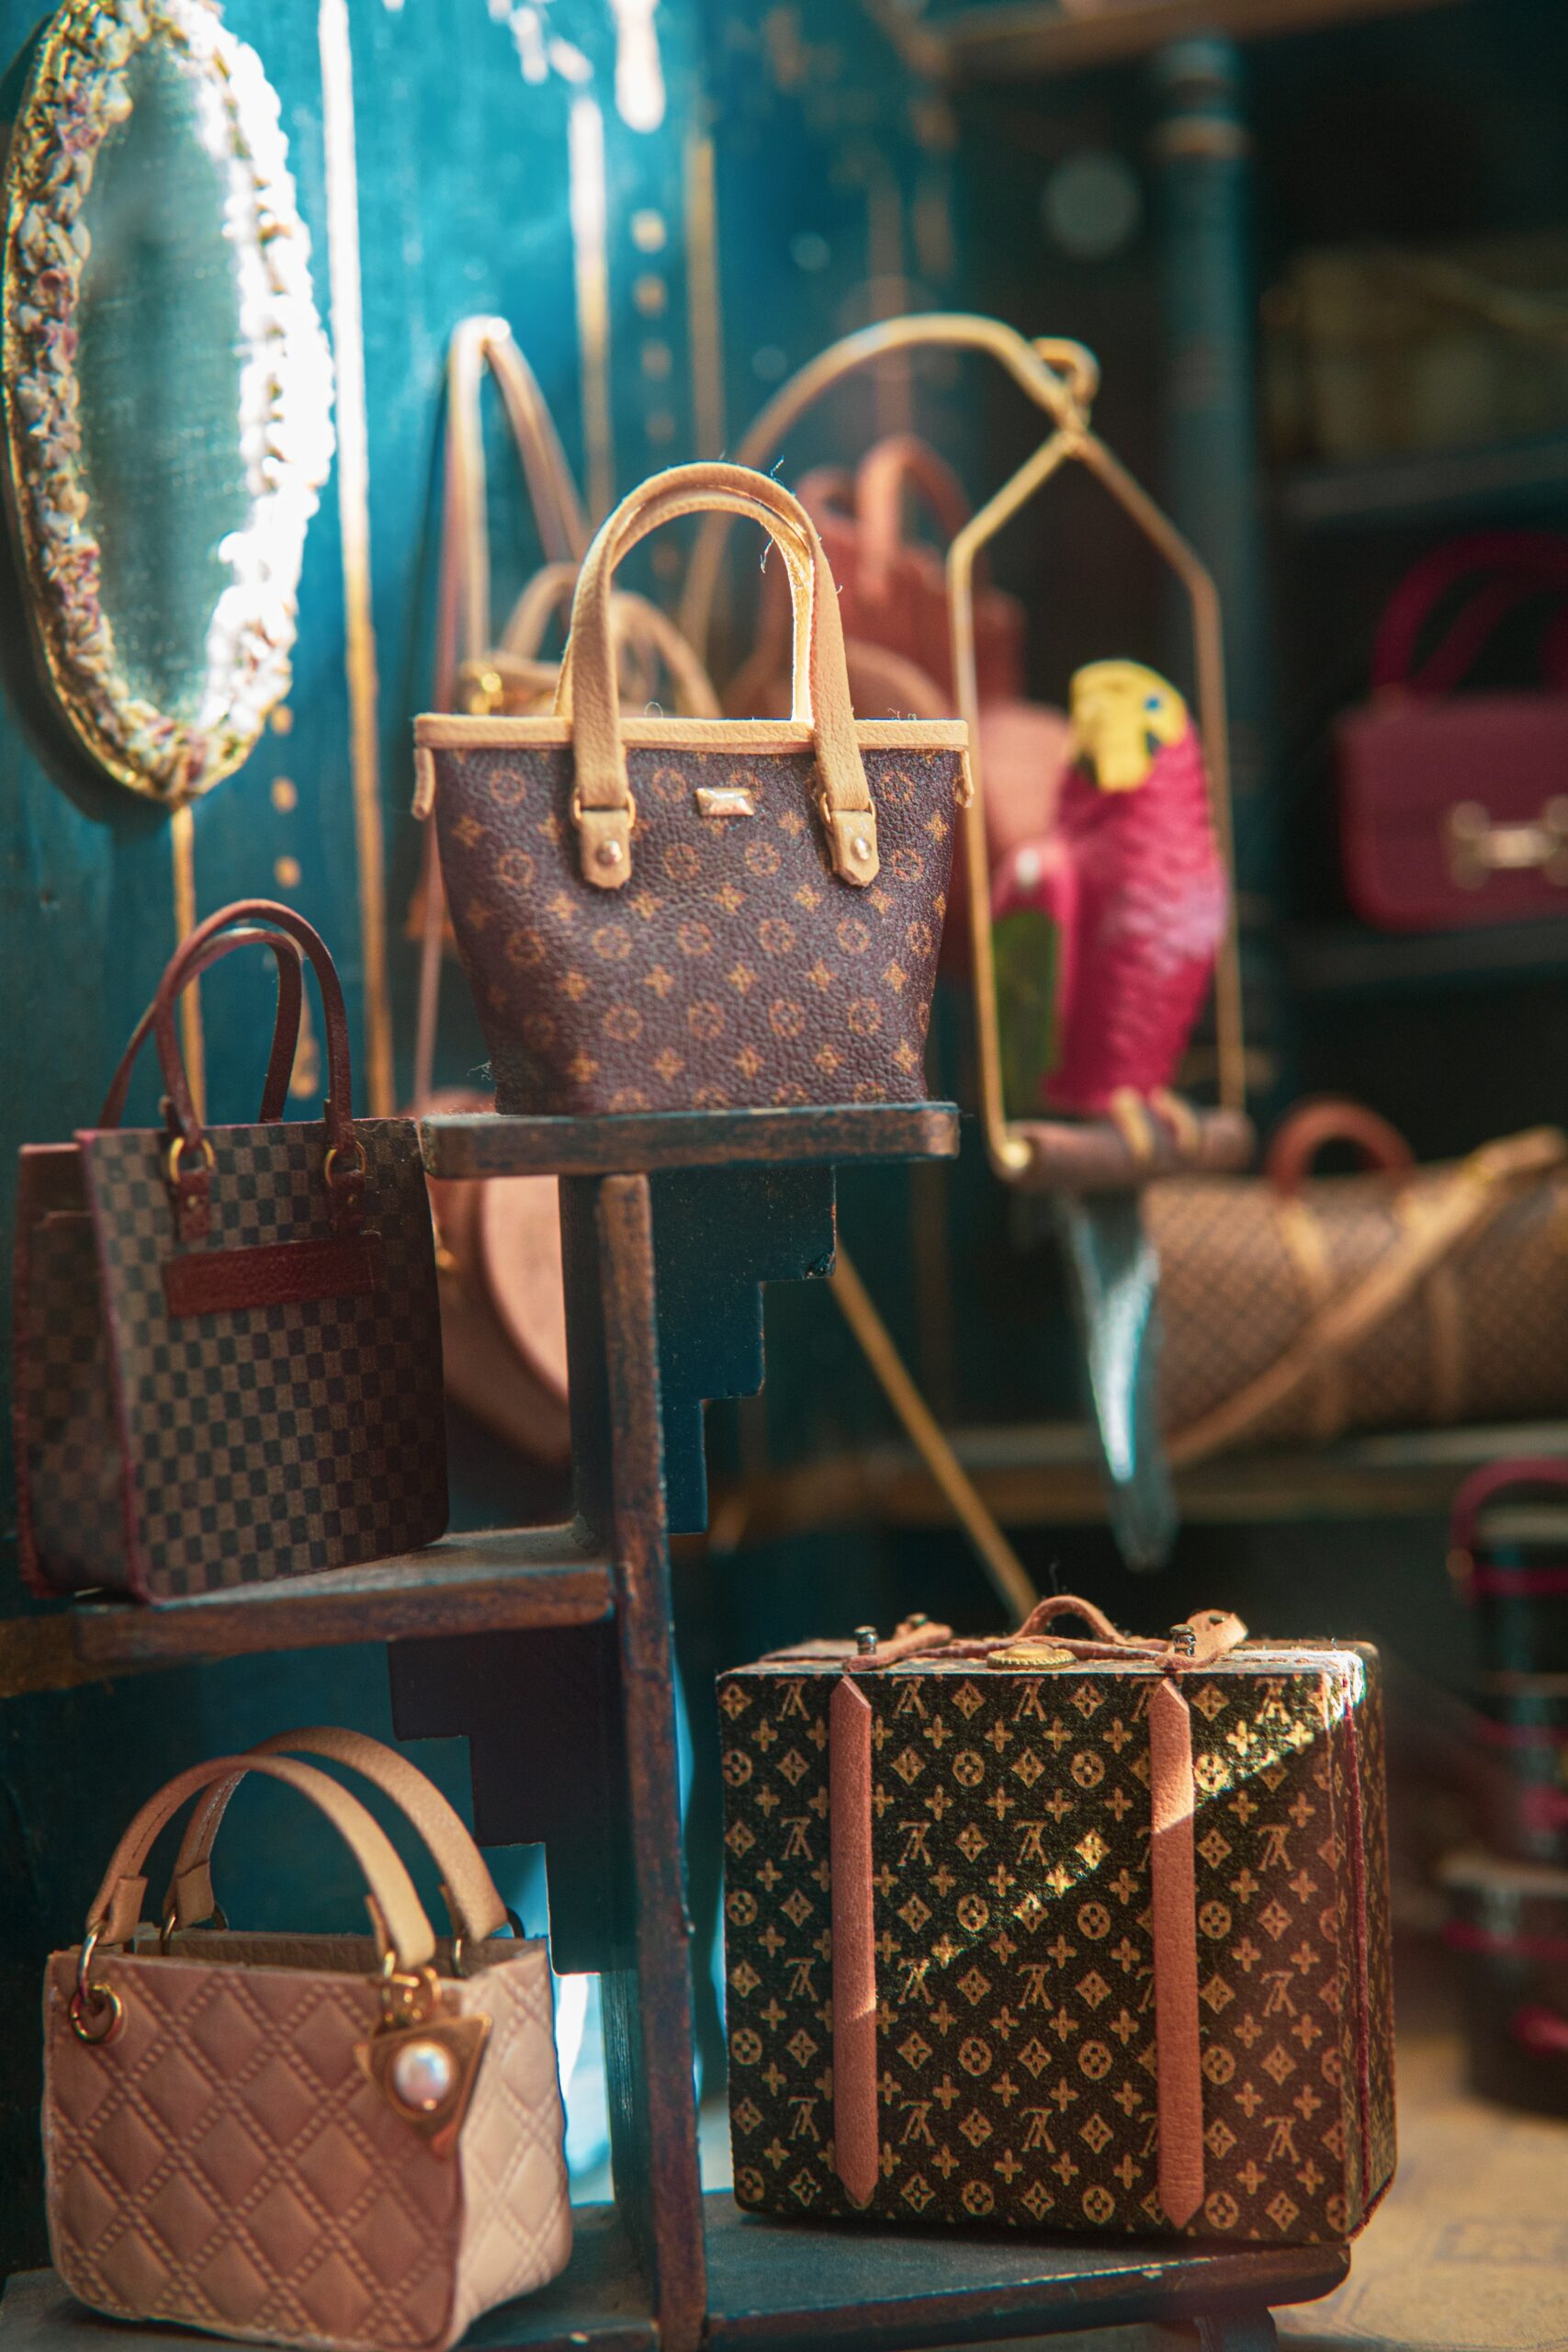 How To Store Your Handbags Properly